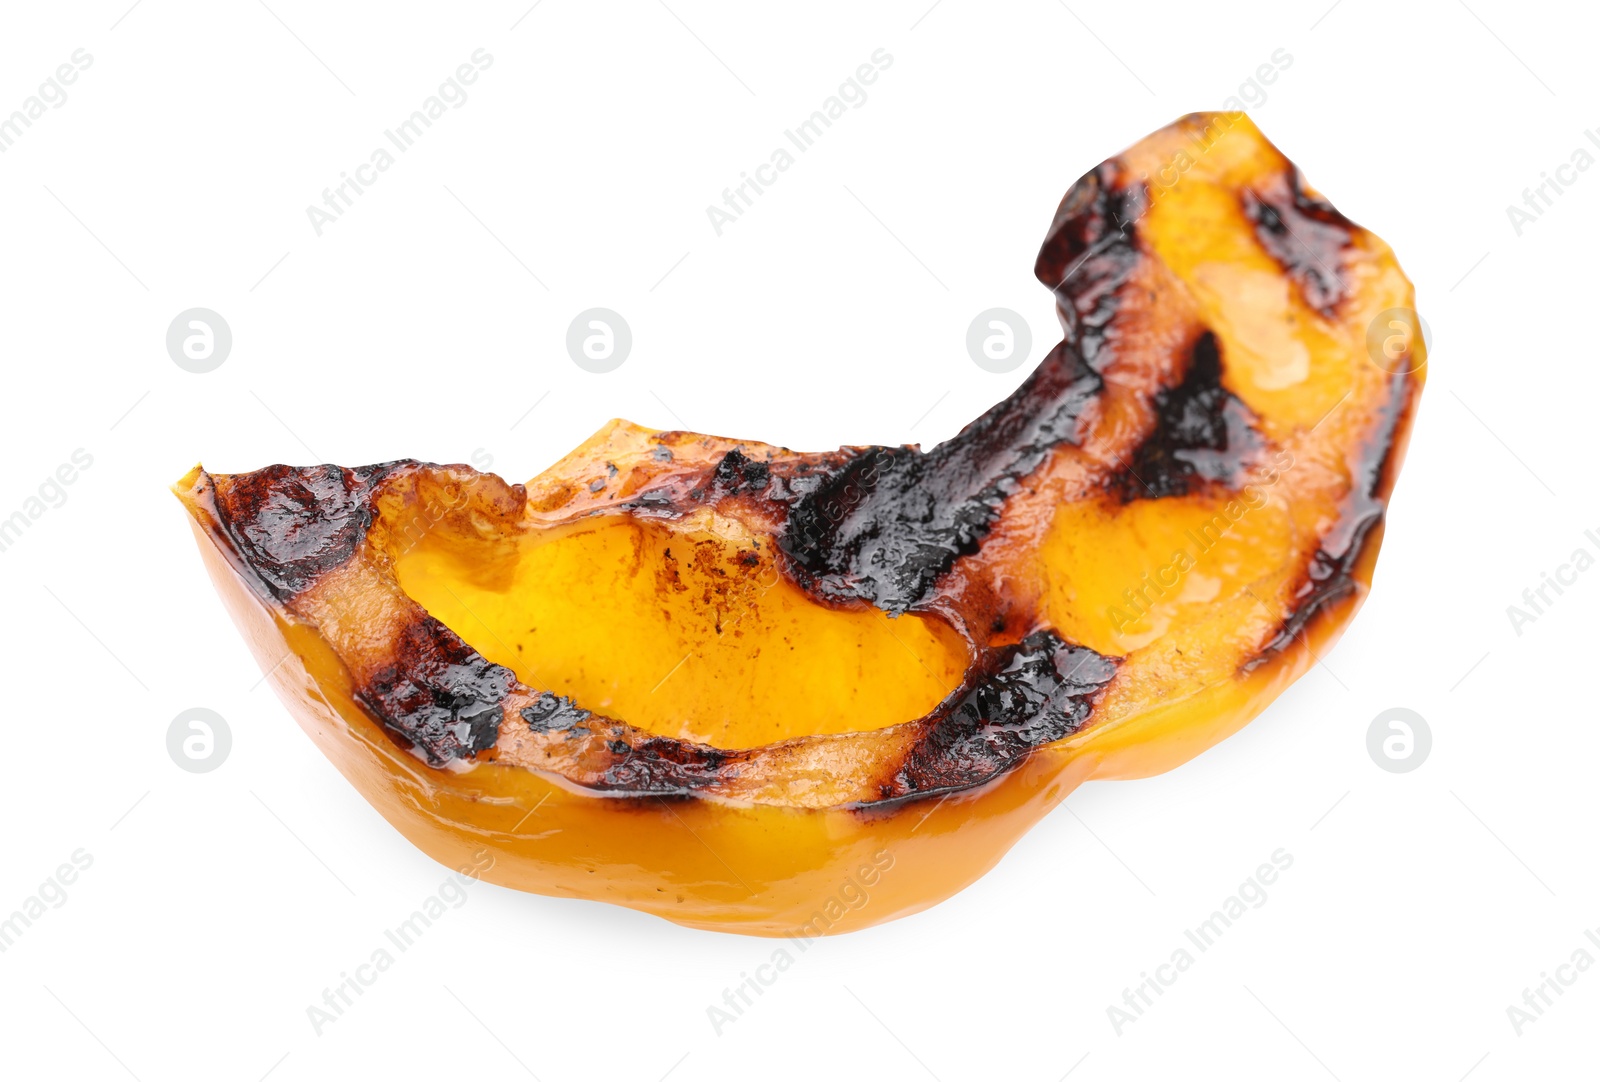 Photo of Slice of grilled yellow pepper isolated on white